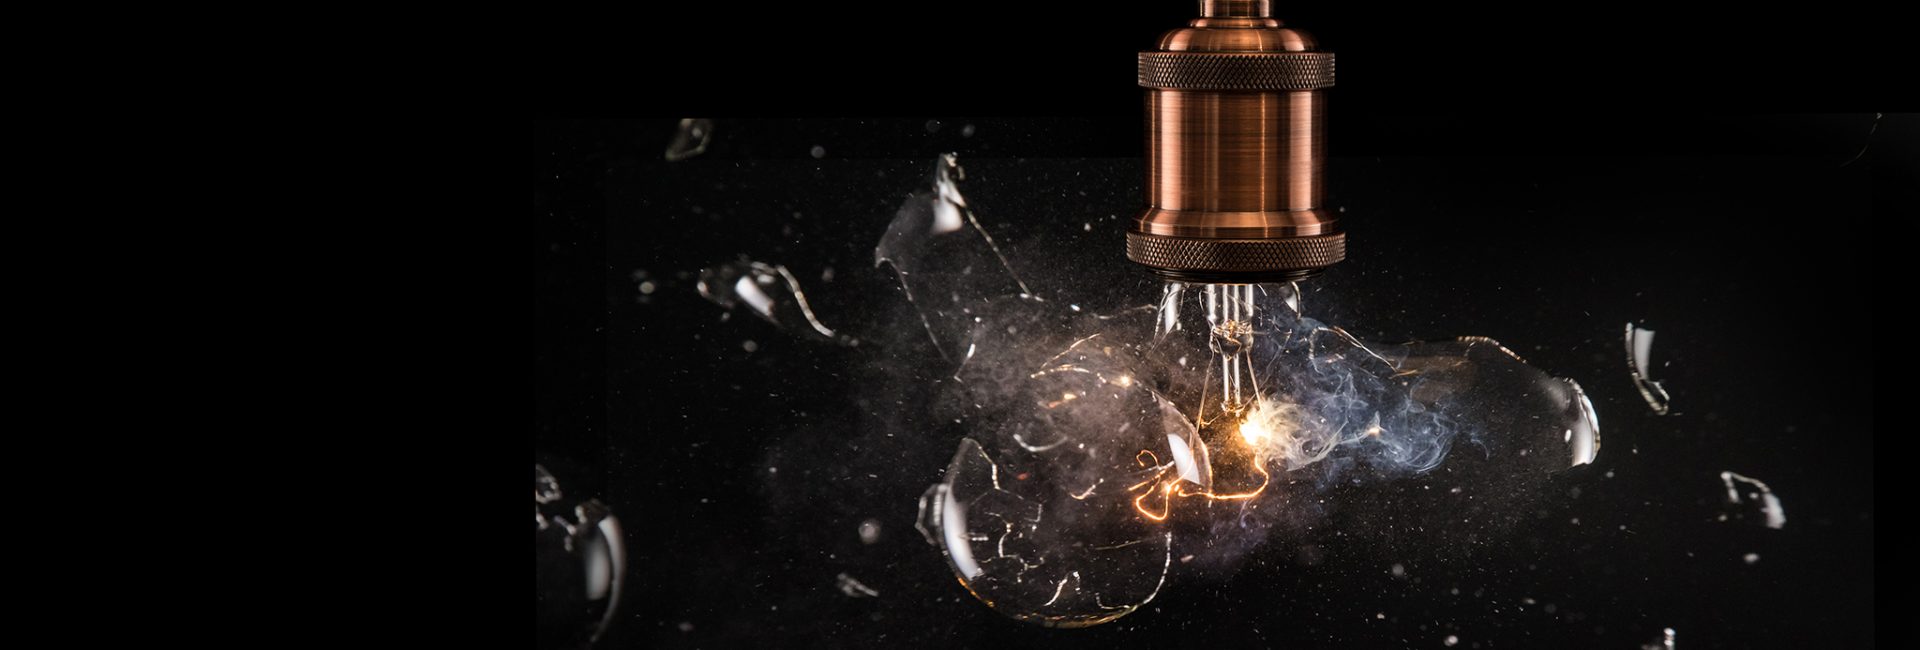 real explosion of vintage electric bulb, close-up.